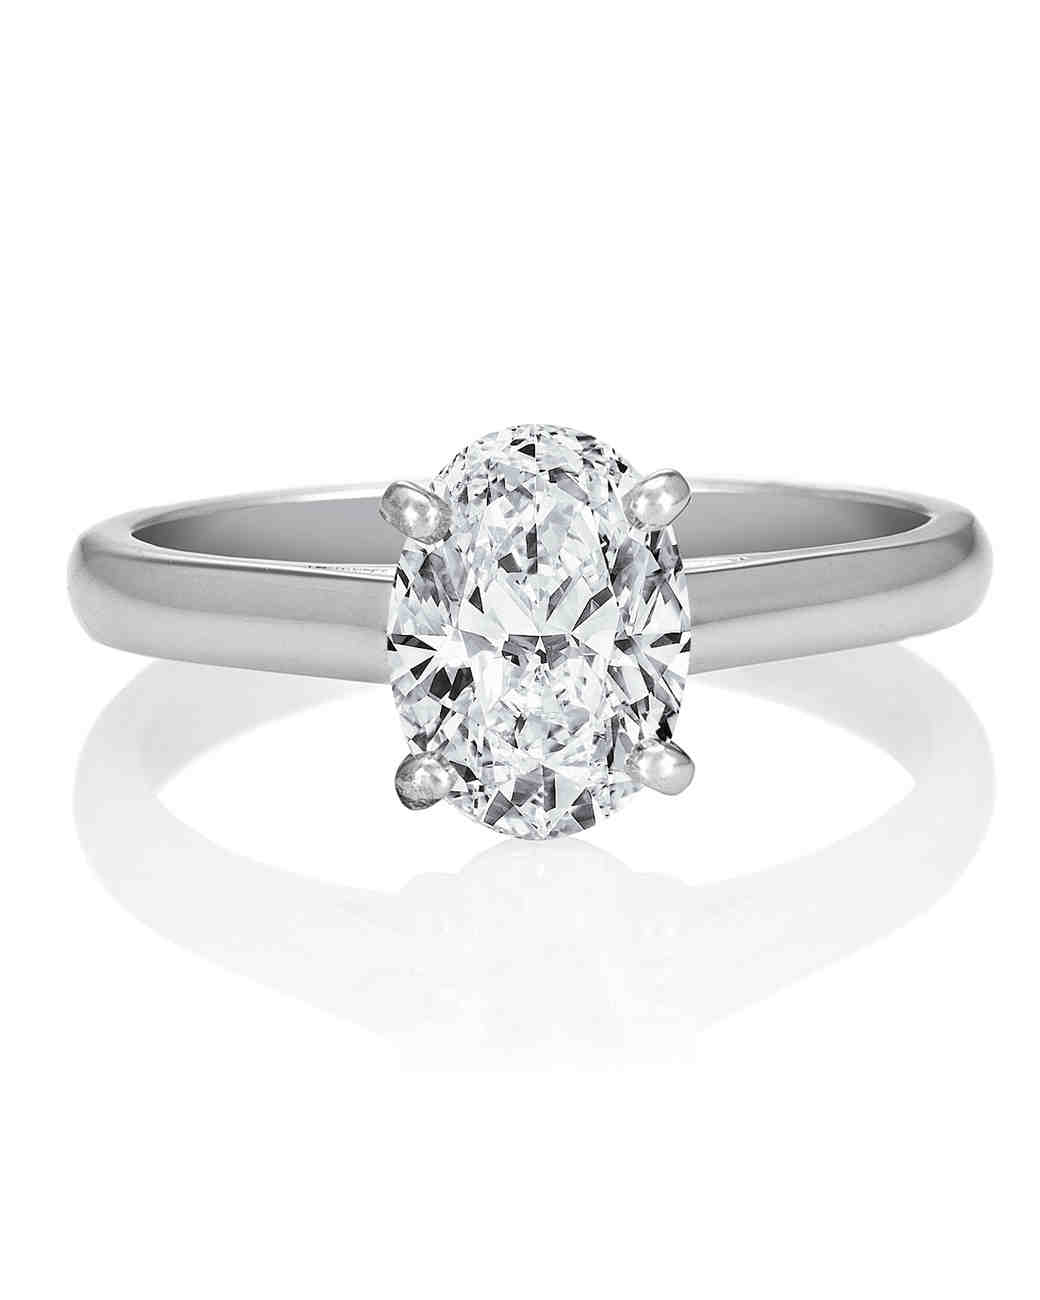  Oval  Engagement  Rings  for the Bride to Be Martha Stewart 